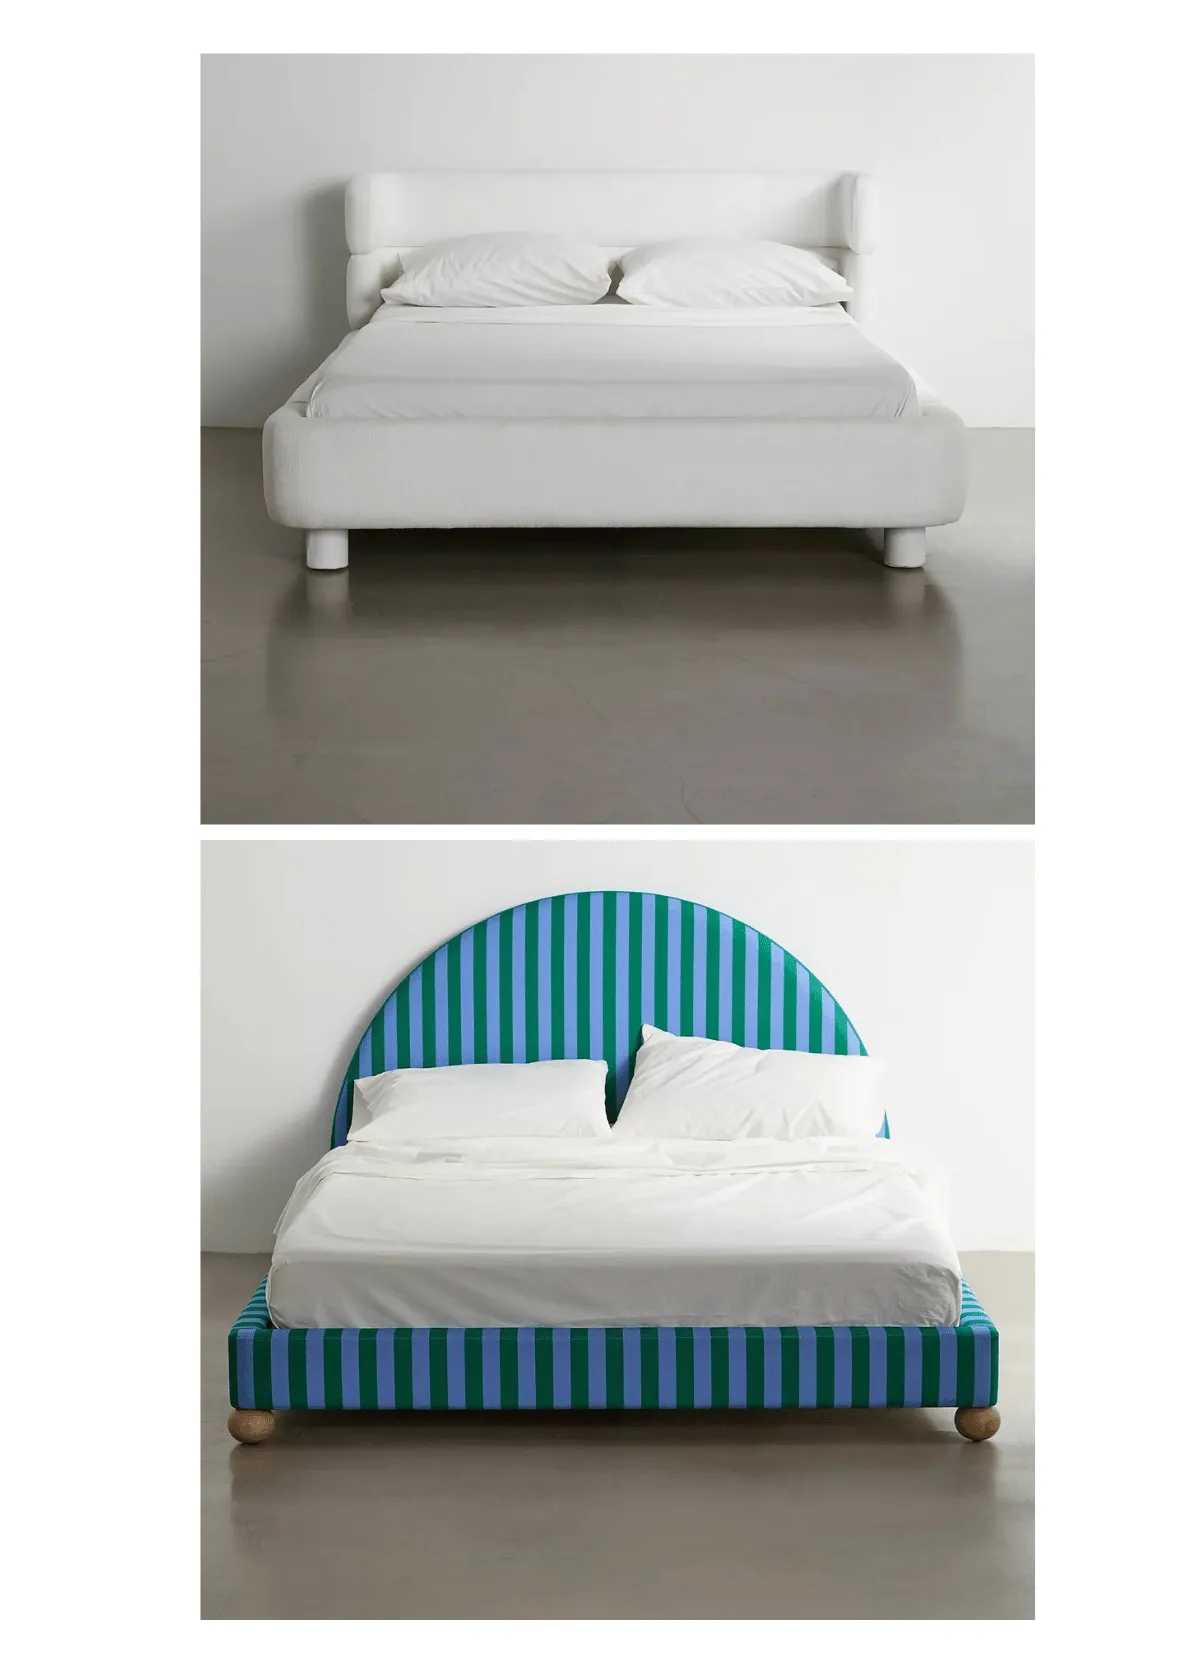 "Finding the Perfect Urban Outfitters Bed Frame for Every Budget"